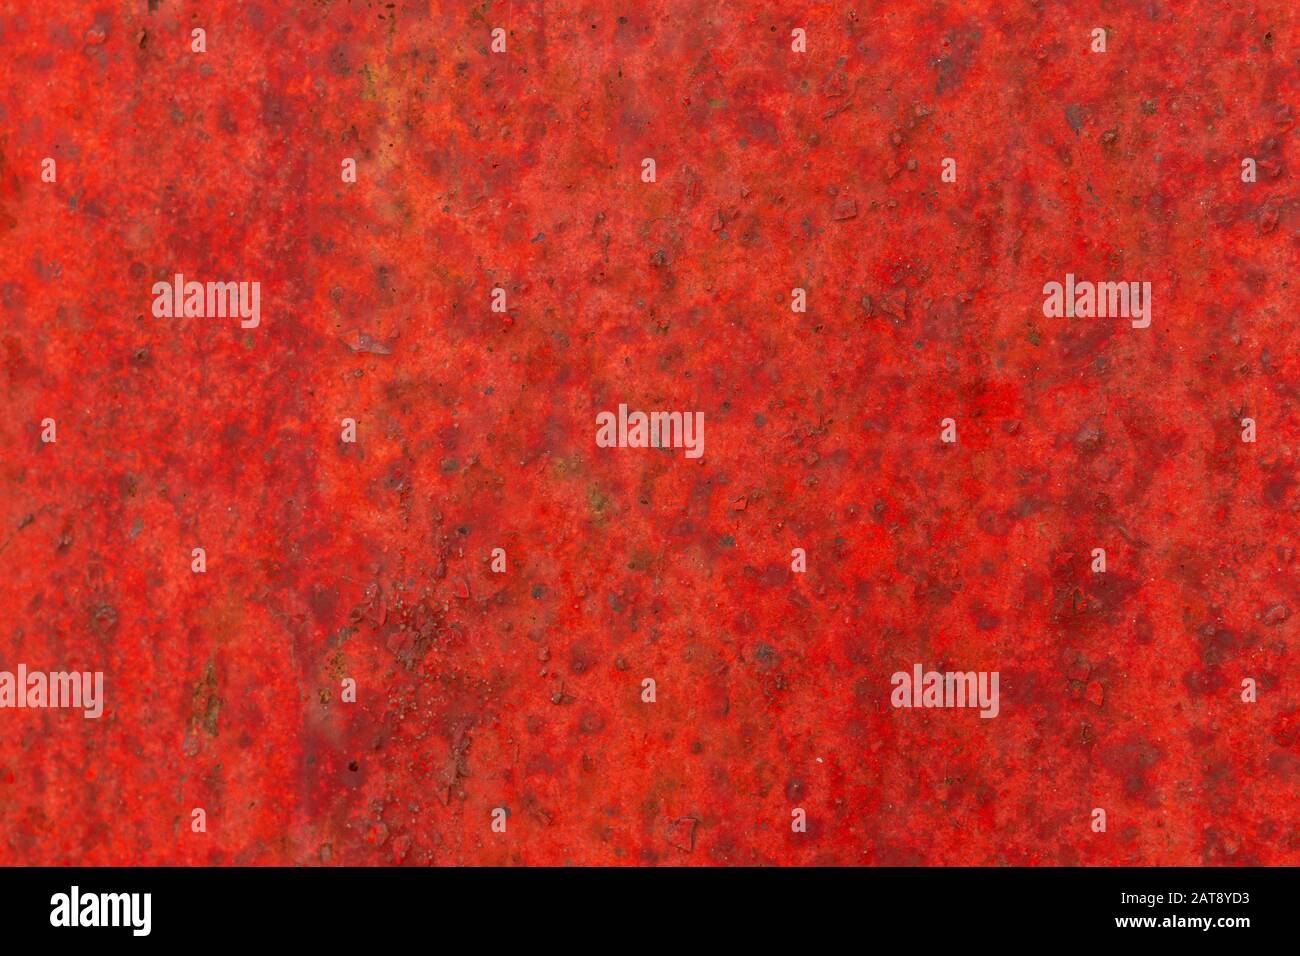 Grungy red texture, fold surface of metal surfaces, abstract background Stock Photo